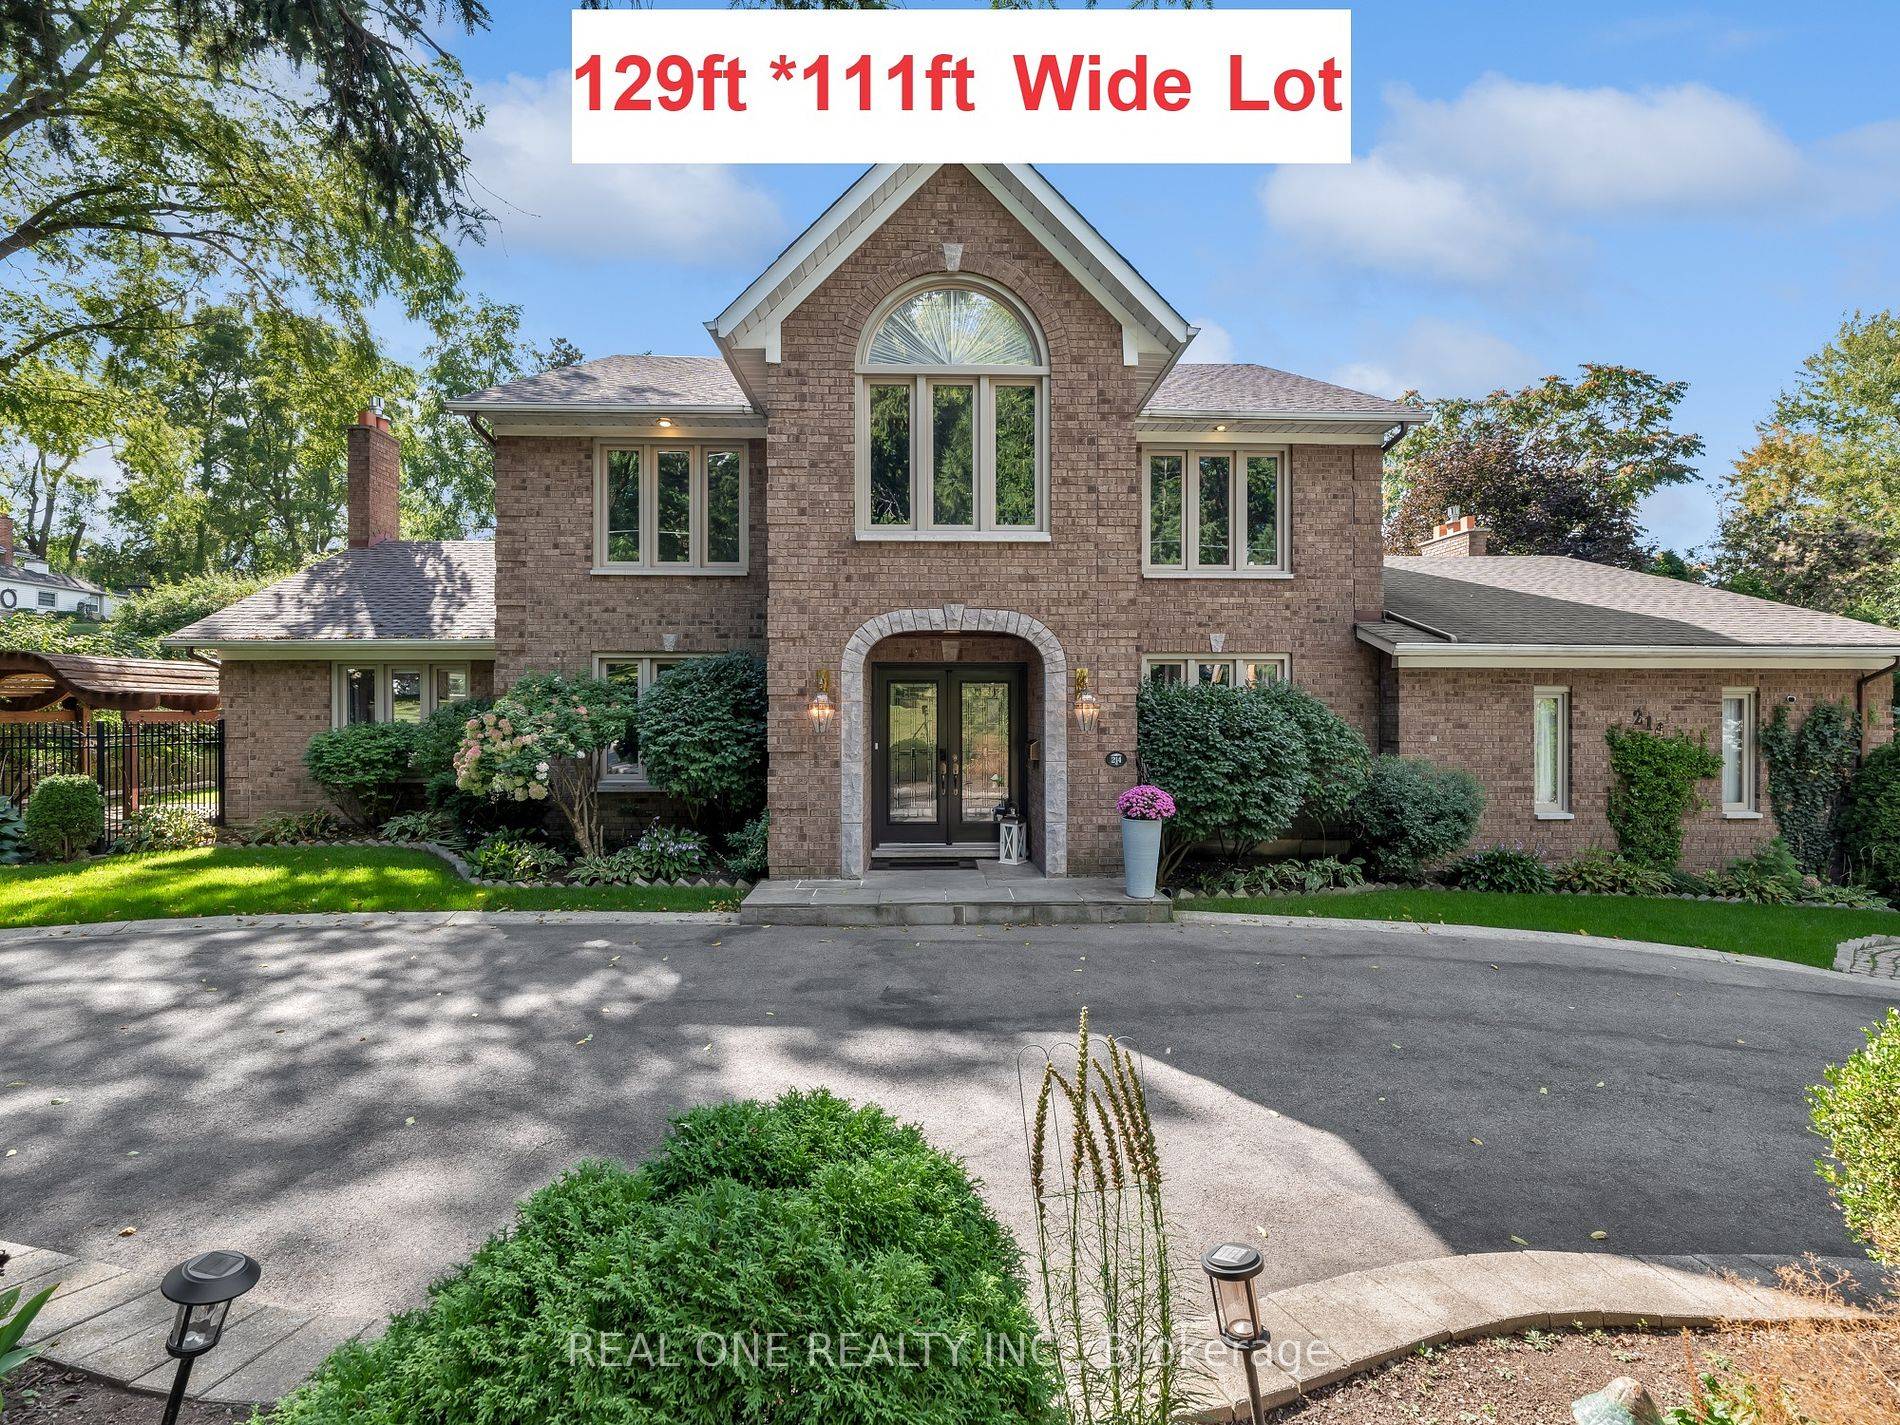 Rare Find wide house on a 129ft X111ft wide lot on one of Acaster's best streets across from estate properties.